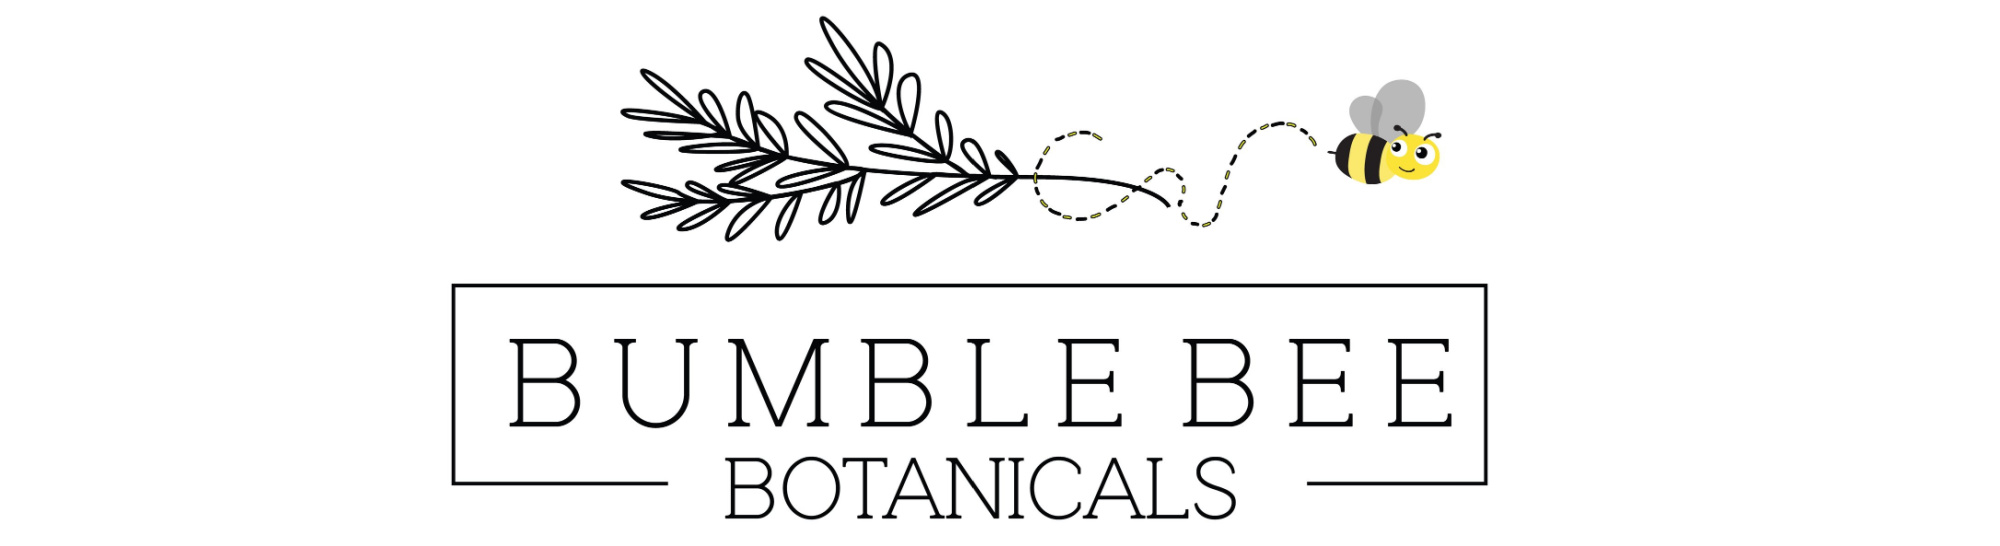 image of bumble bee botanicals in carlsbad ca